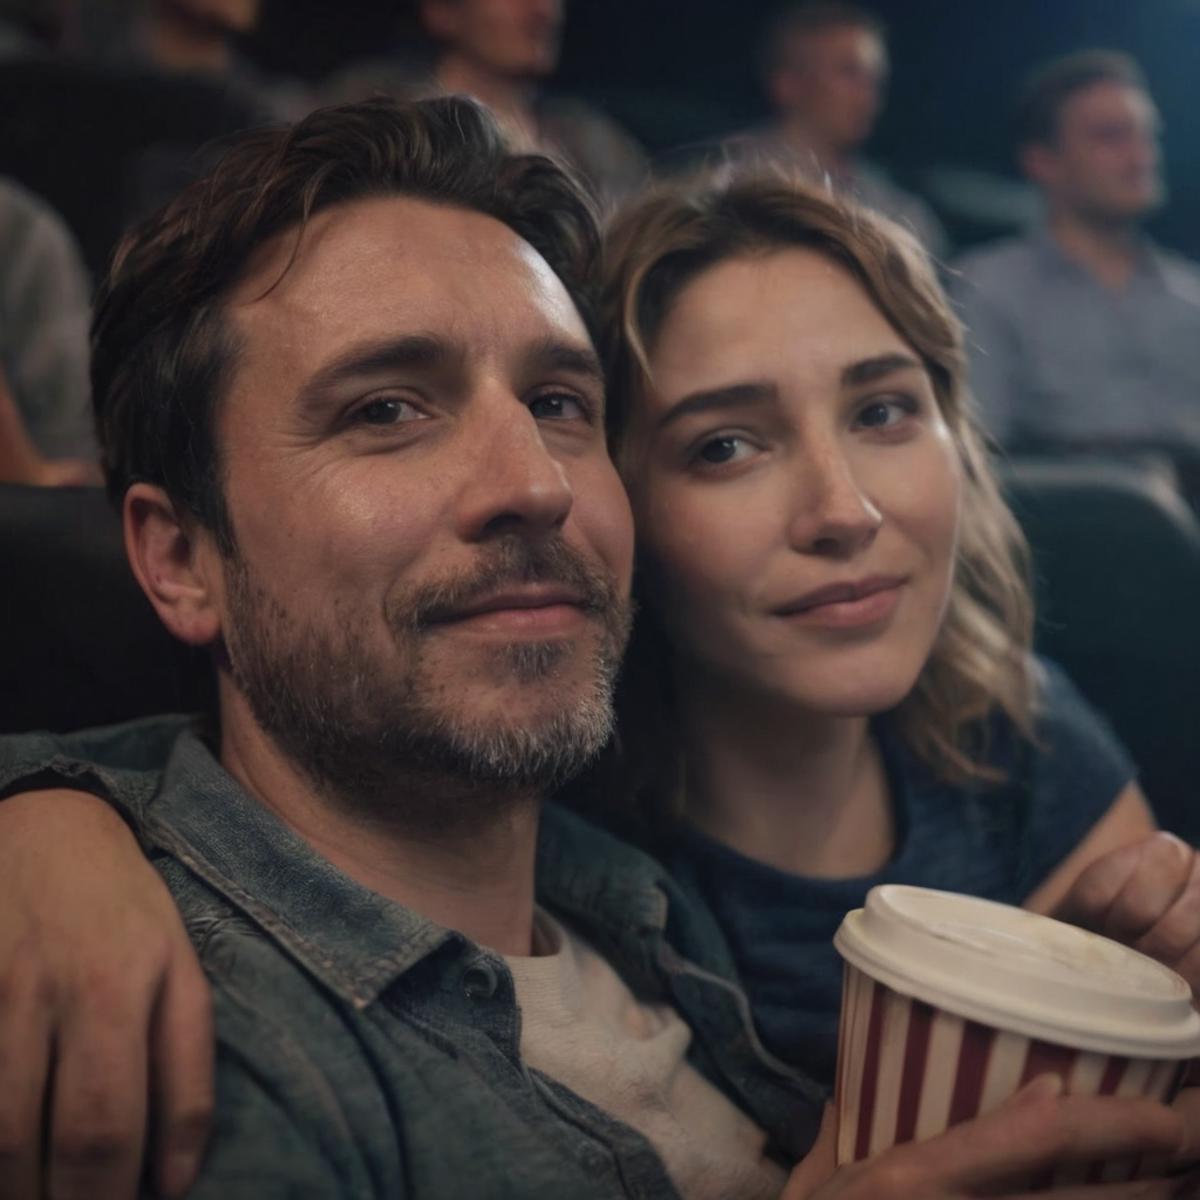 A man and woman sitting together at a movie theater, enjoying a cup of coffee.